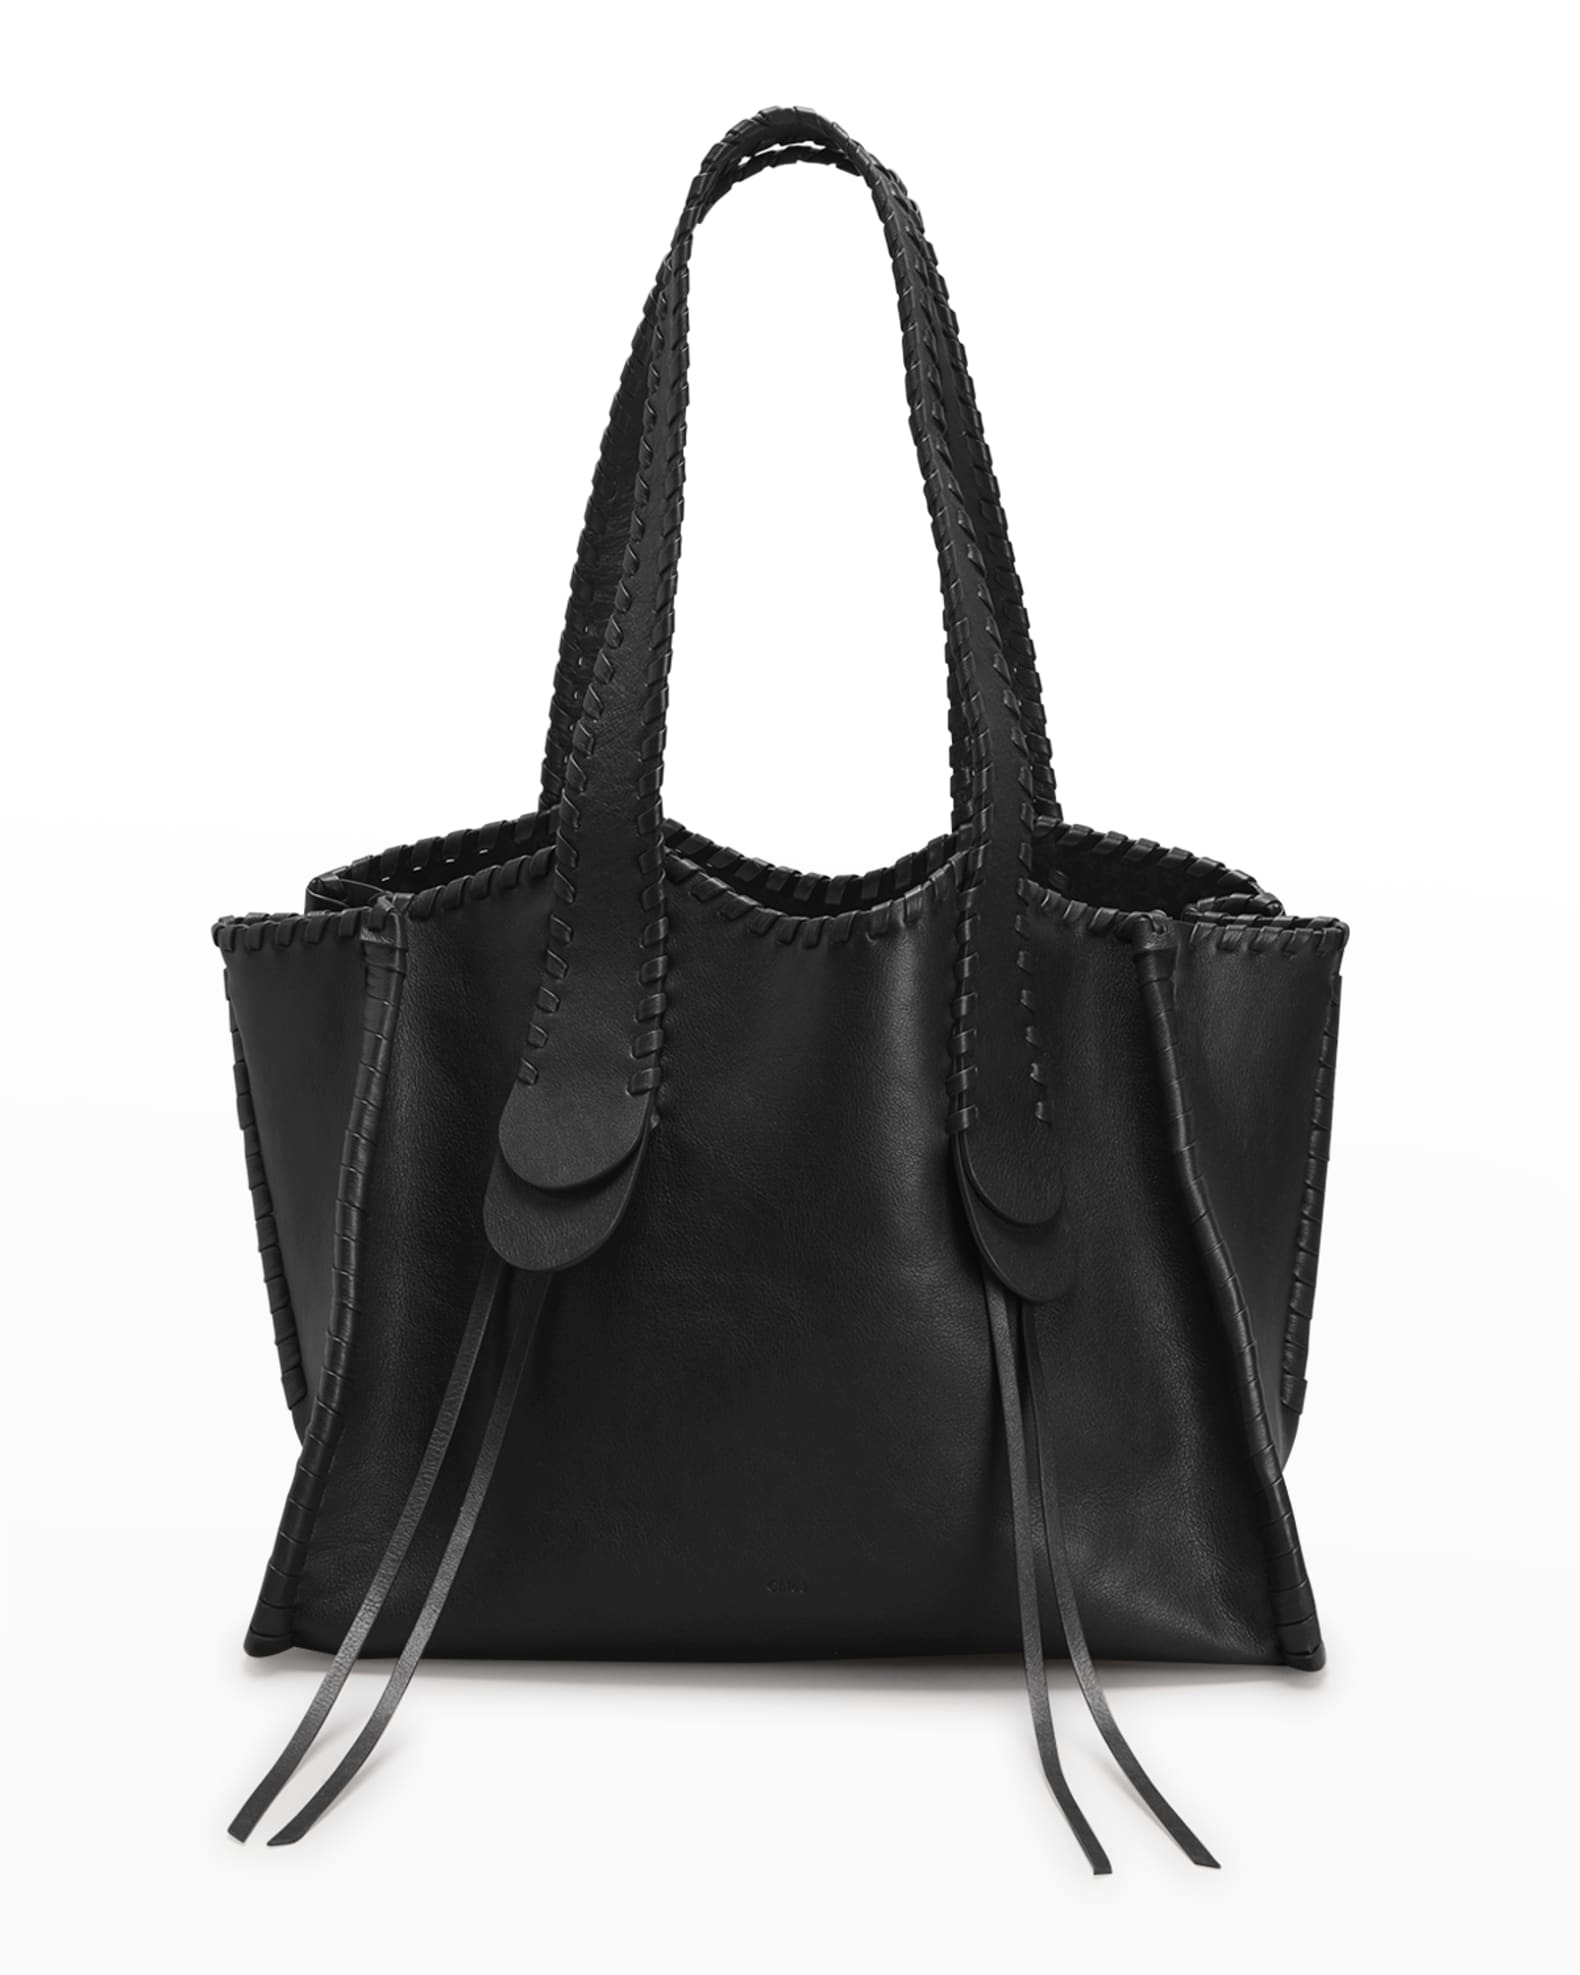 Chloe Mony Large Whipstitch Leather Tote Bag | Neiman Marcus